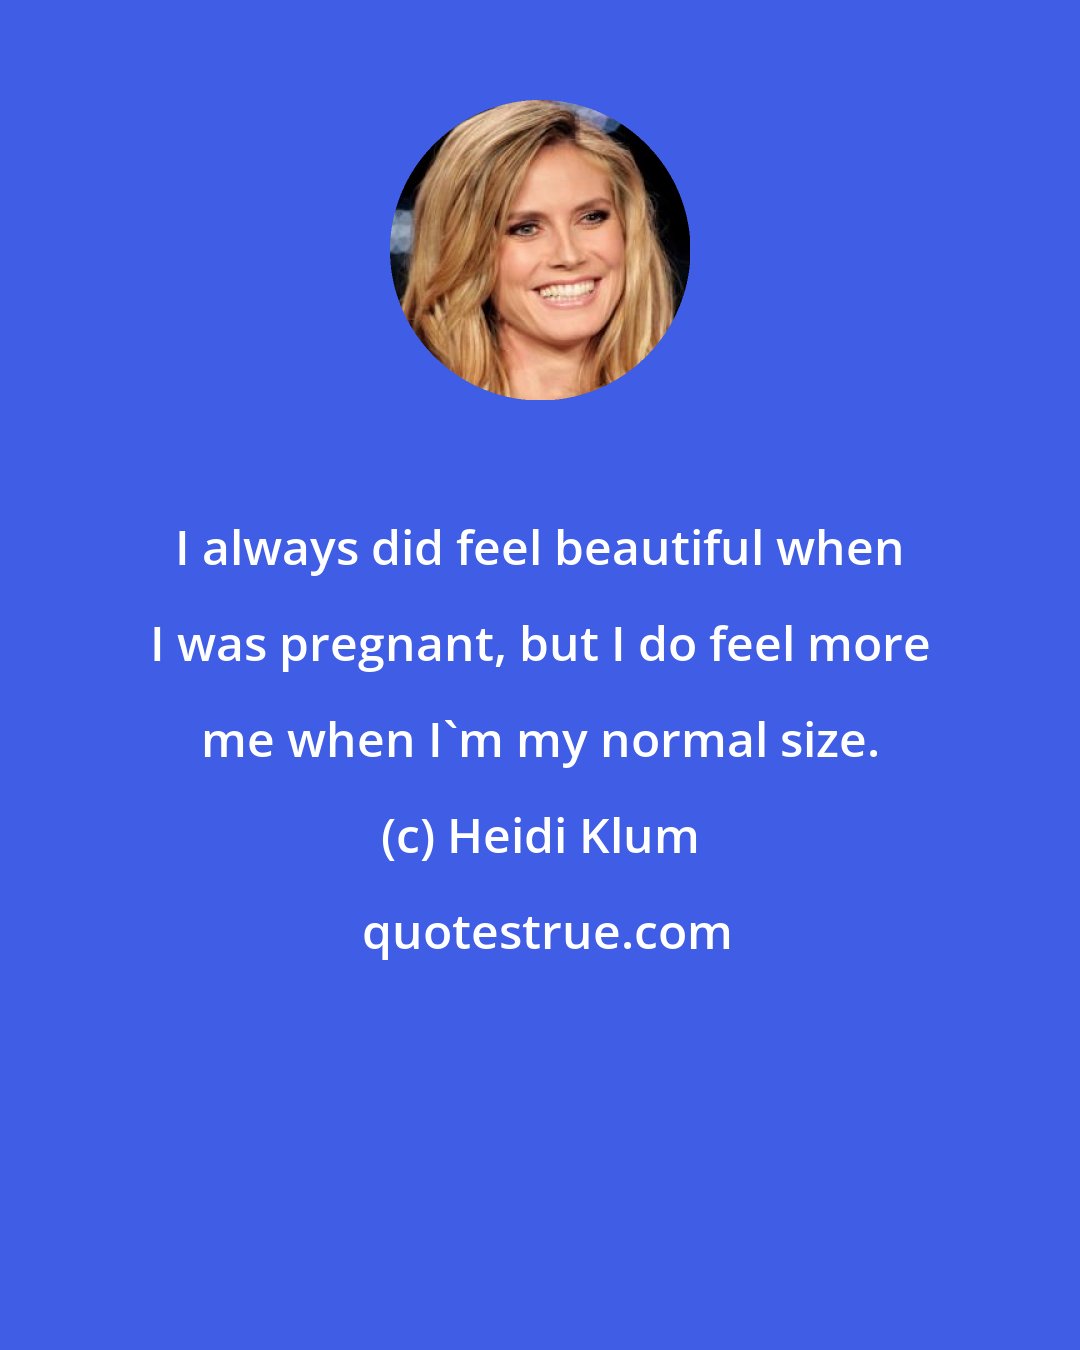 Heidi Klum: I always did feel beautiful when I was pregnant, but I do feel more me when I'm my normal size.